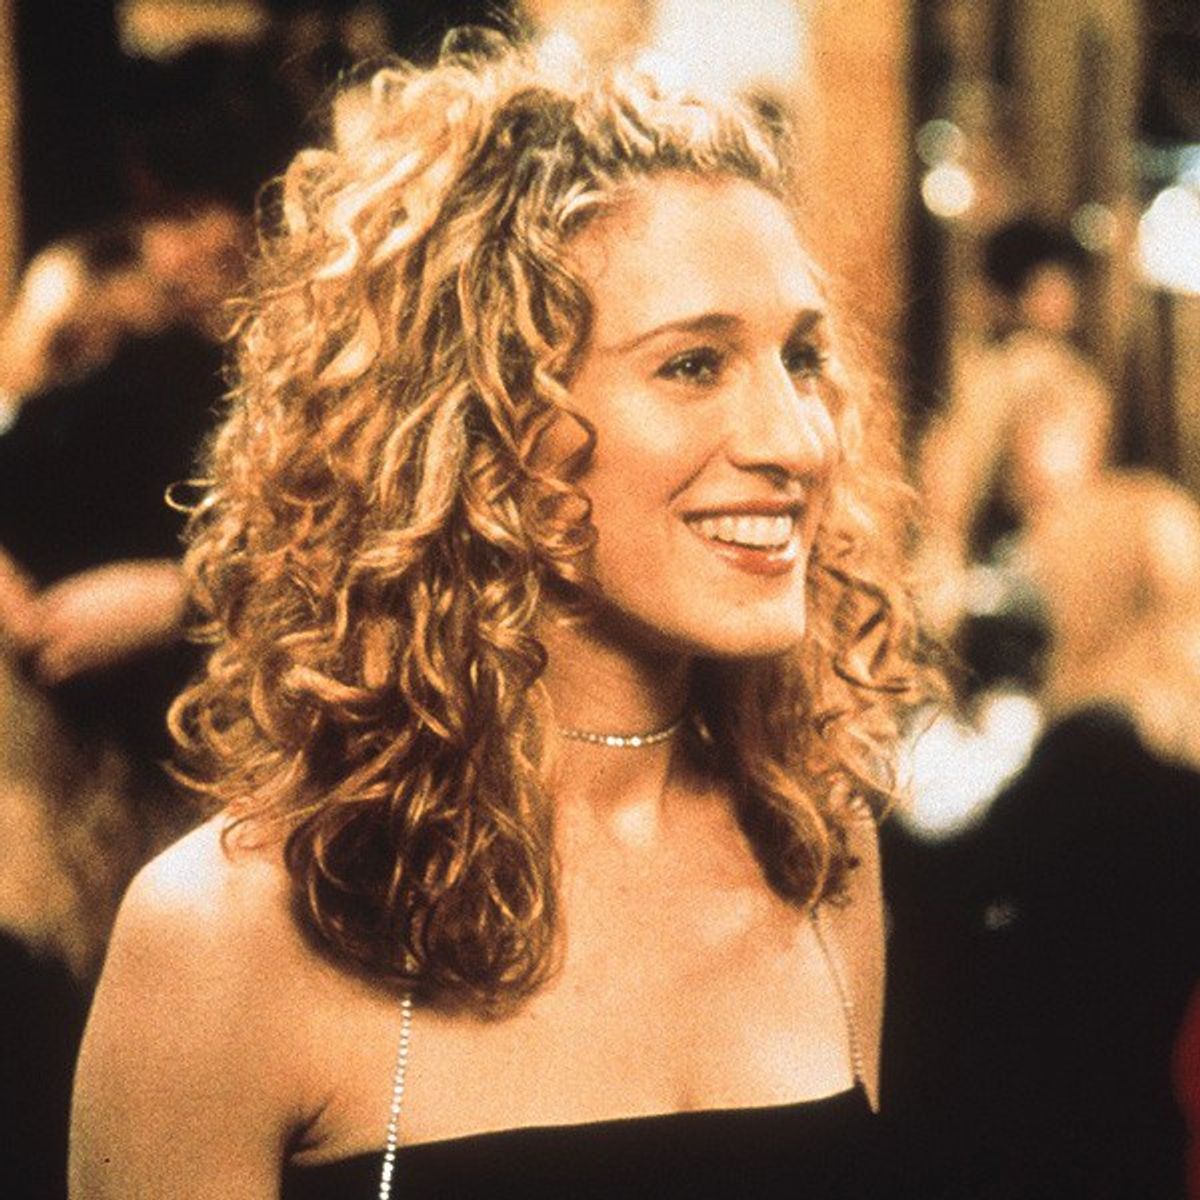 This Week In Fashion: Carrie Bradshaw